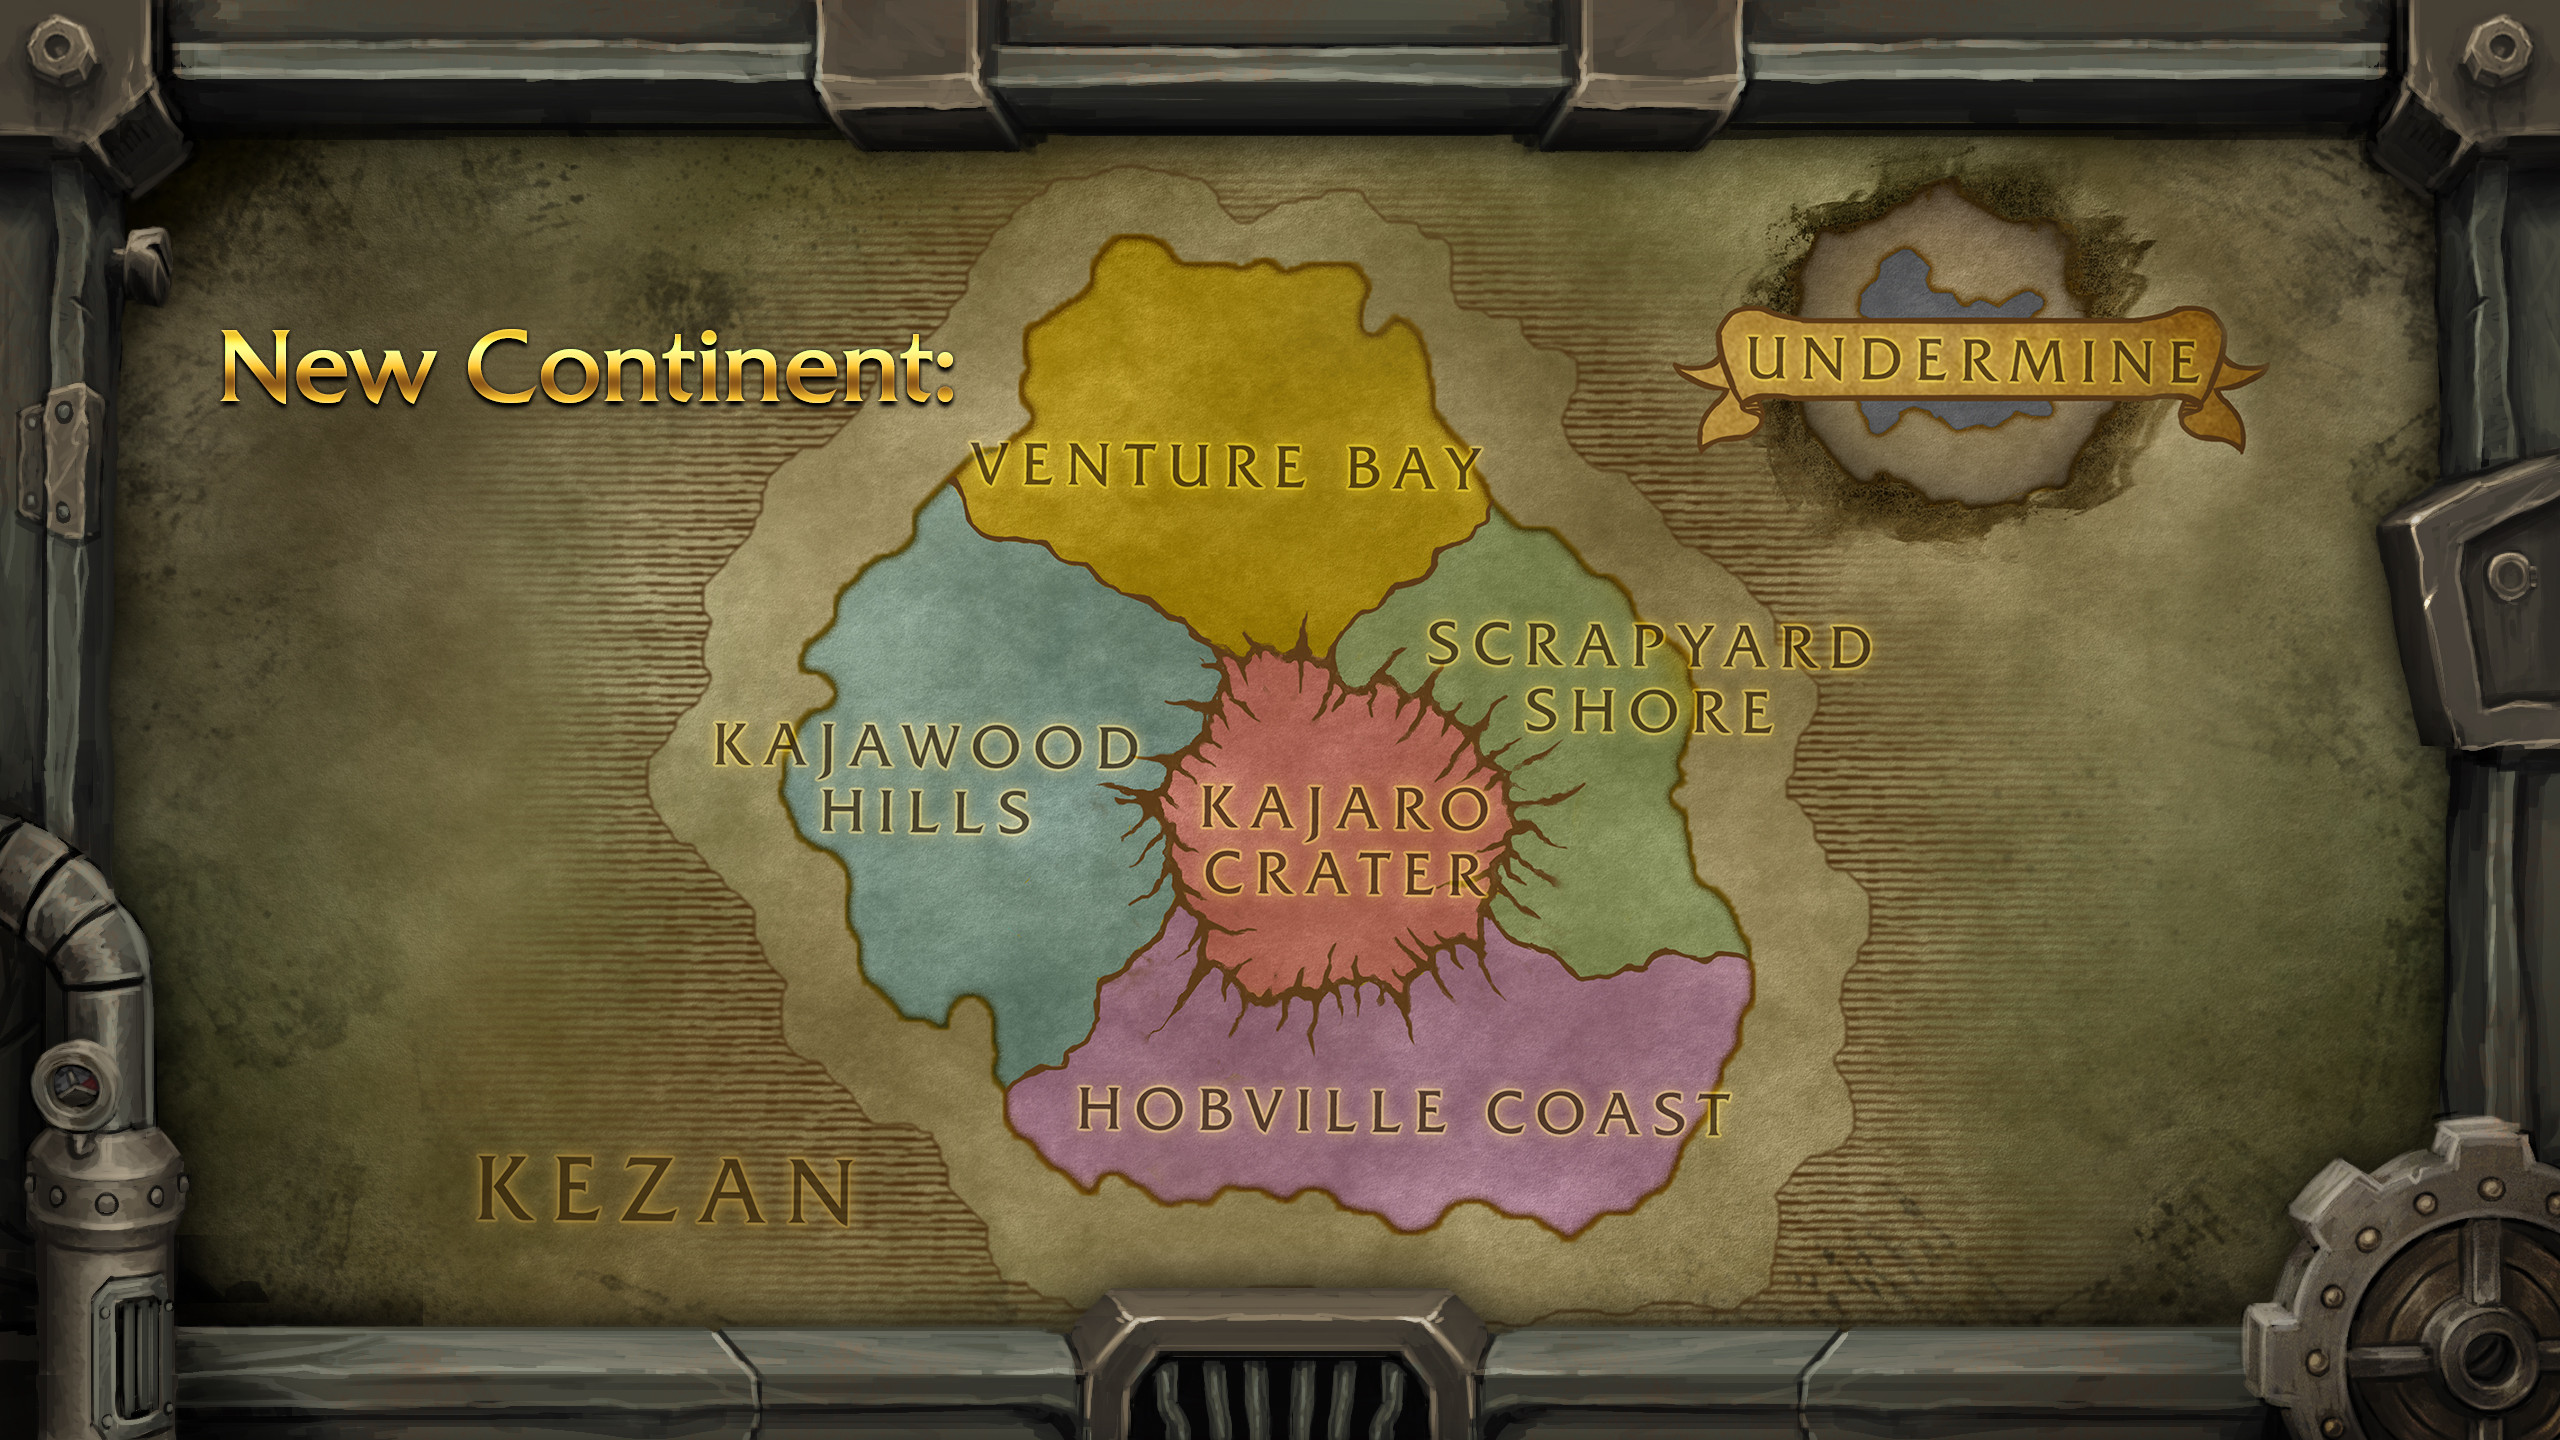 Third Slide - Map of the "new" continent